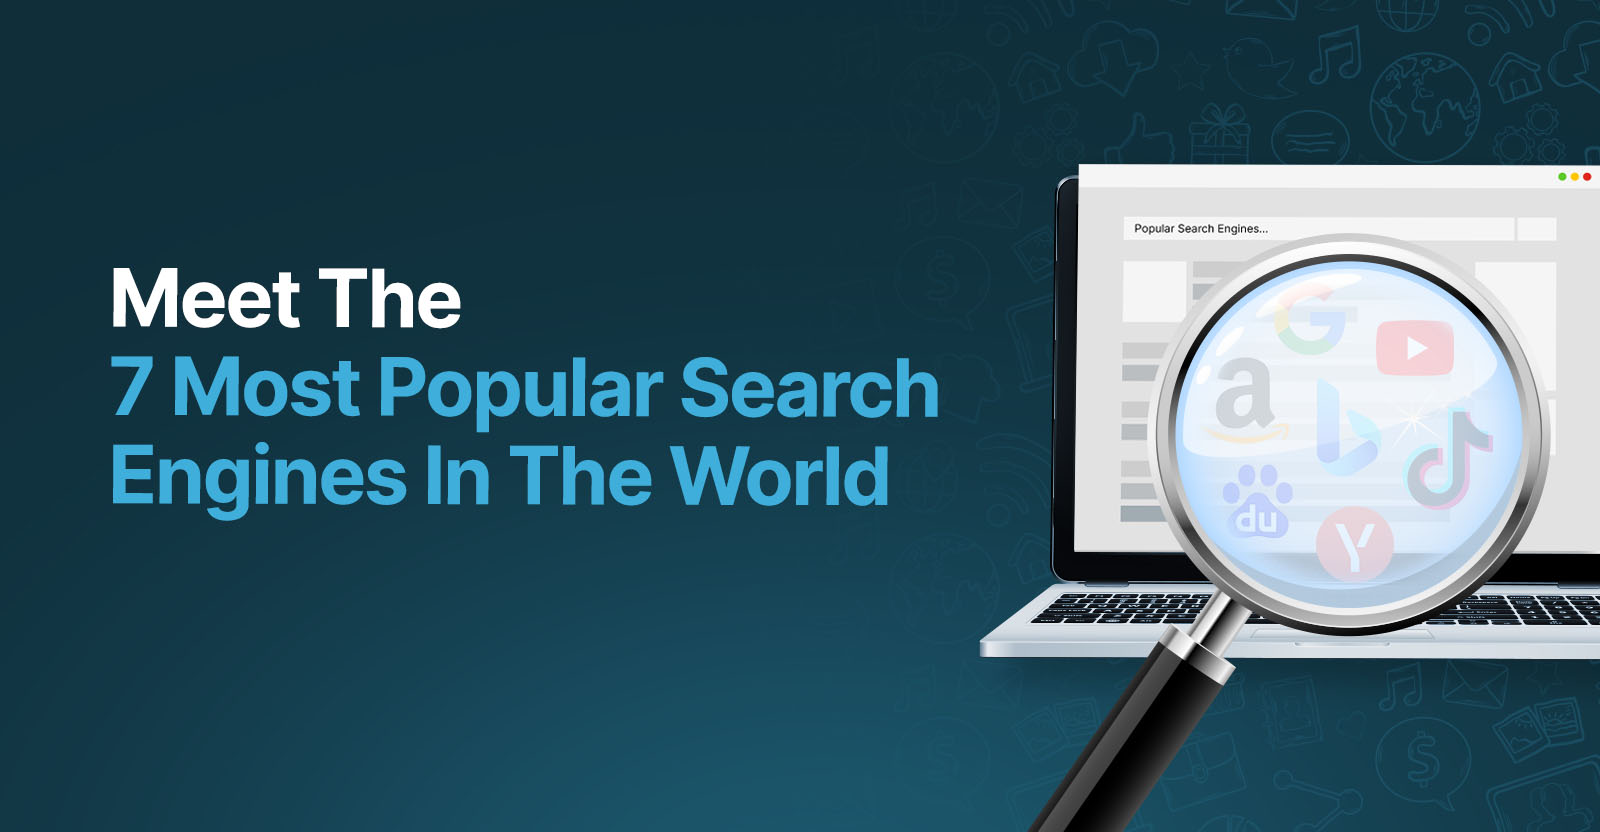 Meet the 7 Most Popular Search Engines in the World